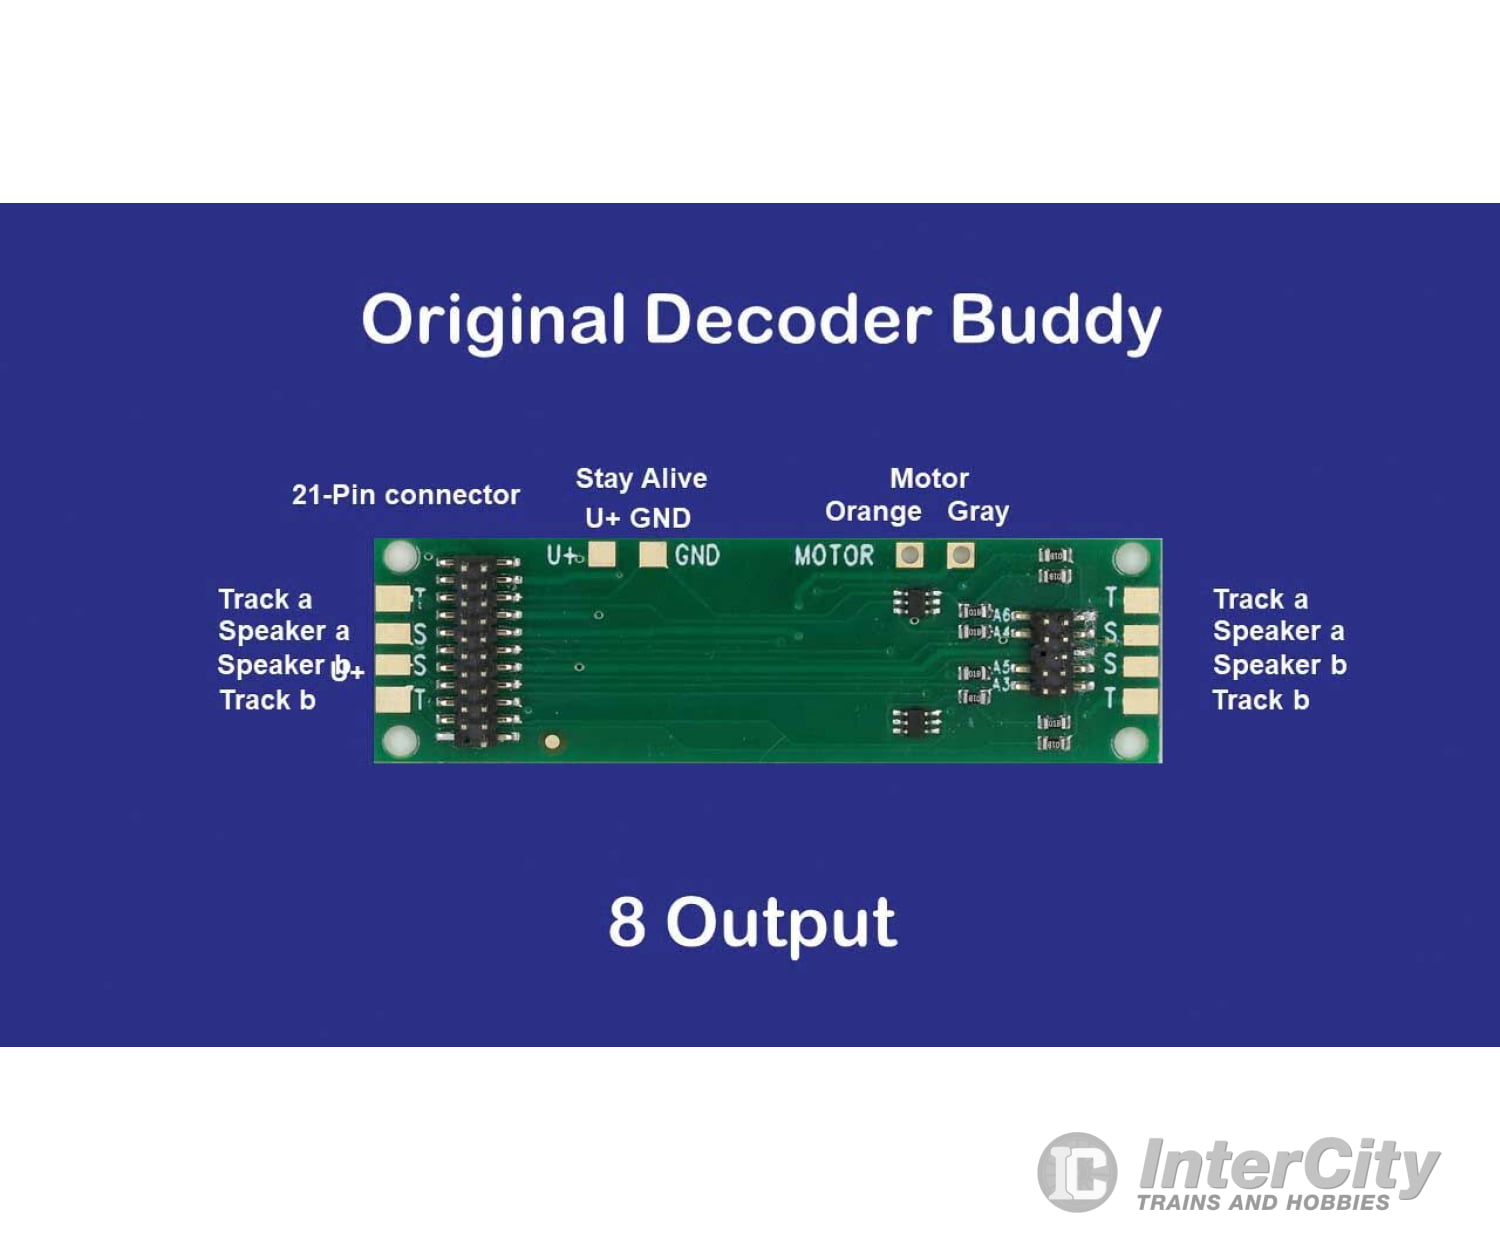 Nix Trains Ntz4 Decoder Buddy Dcc Motherboard With 21 - Pin Socket (1.0K O Accessories